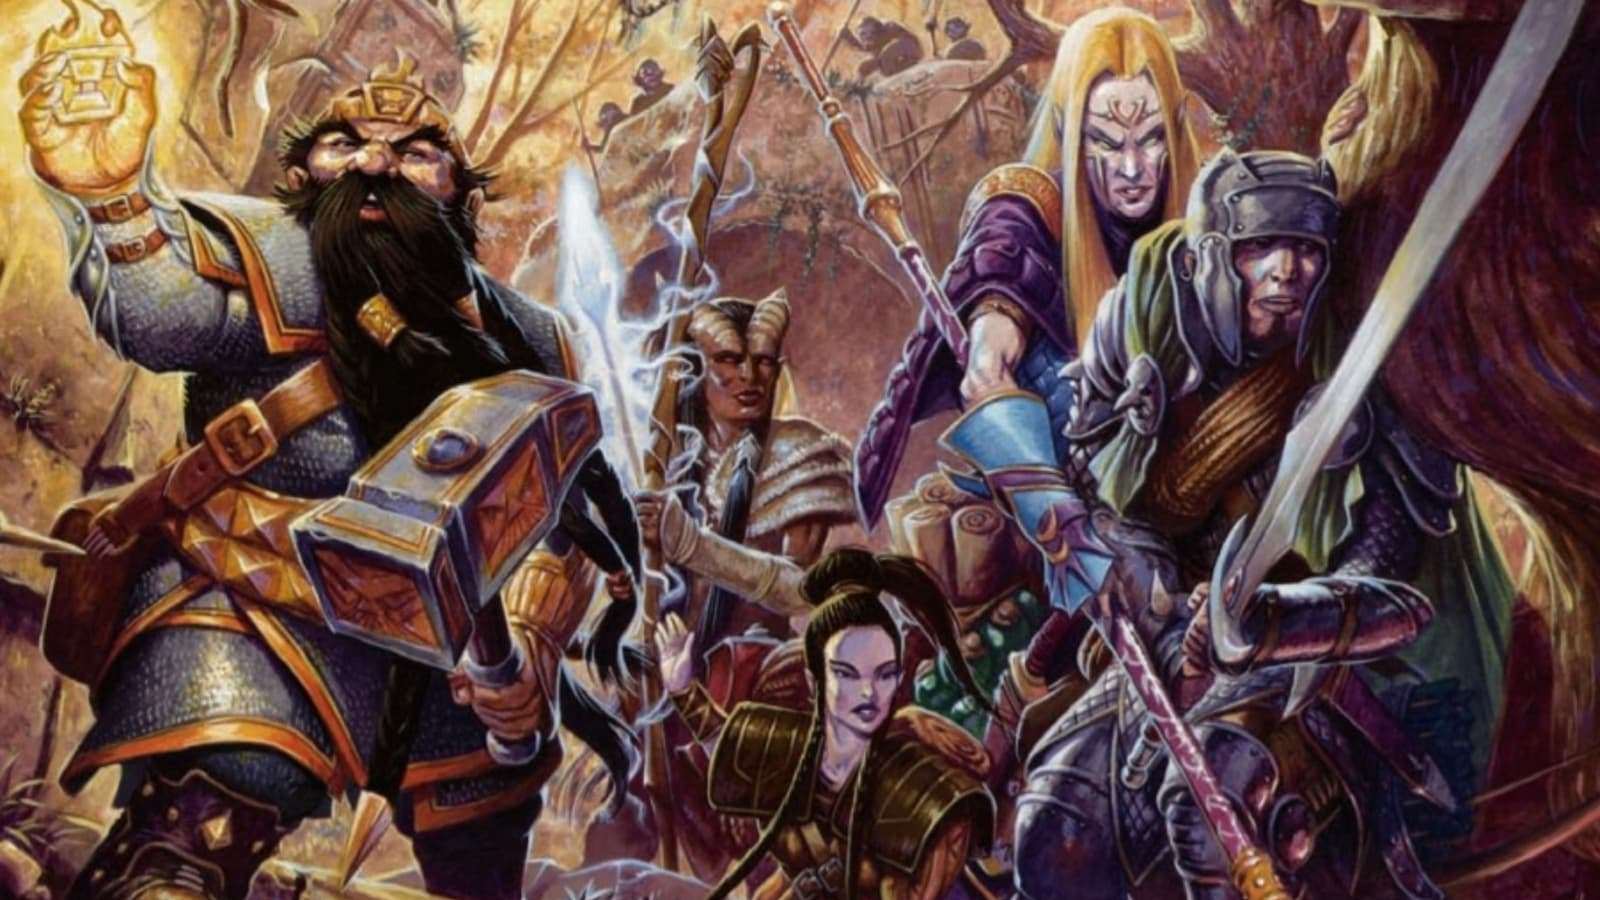 A Dungeons & Dragons 5E adventuring party